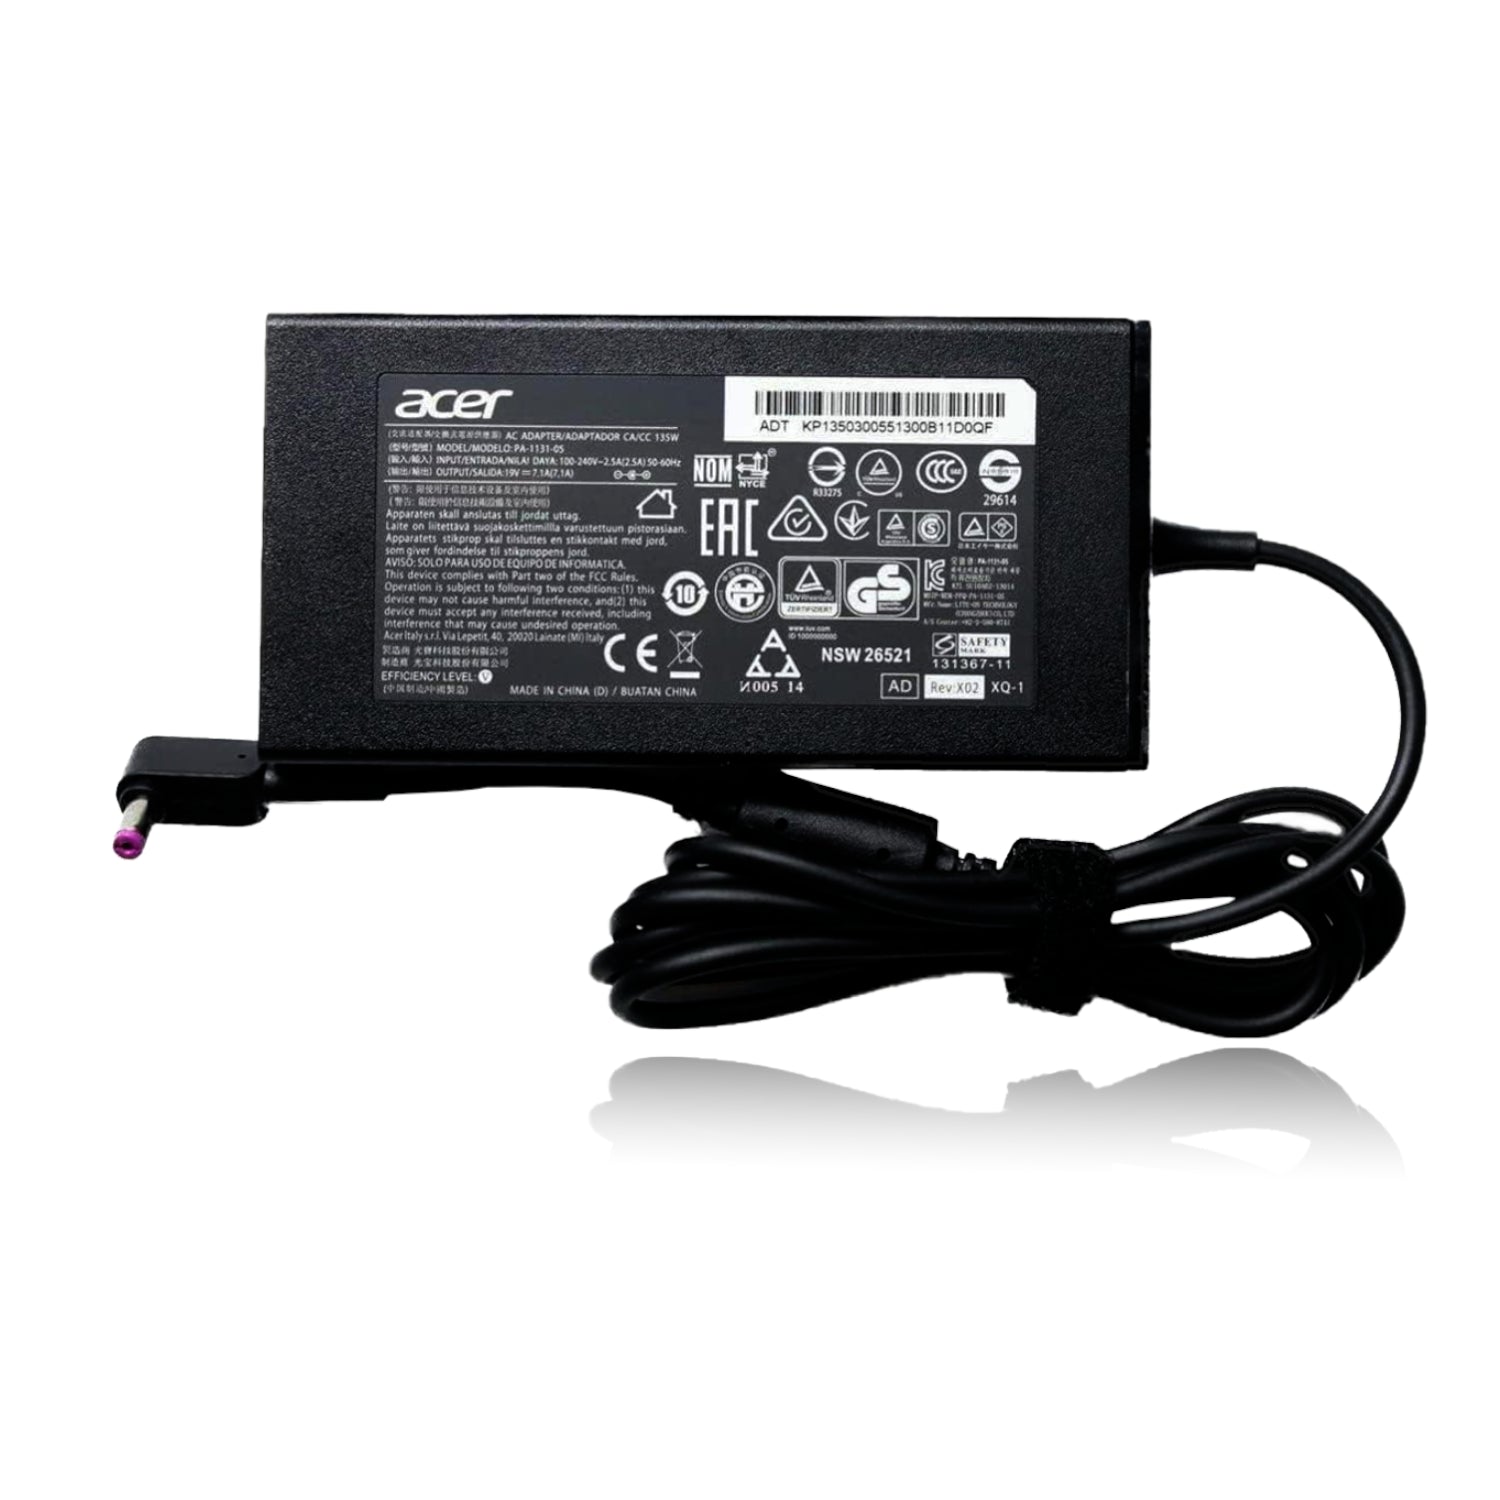 180w acer laptop charger